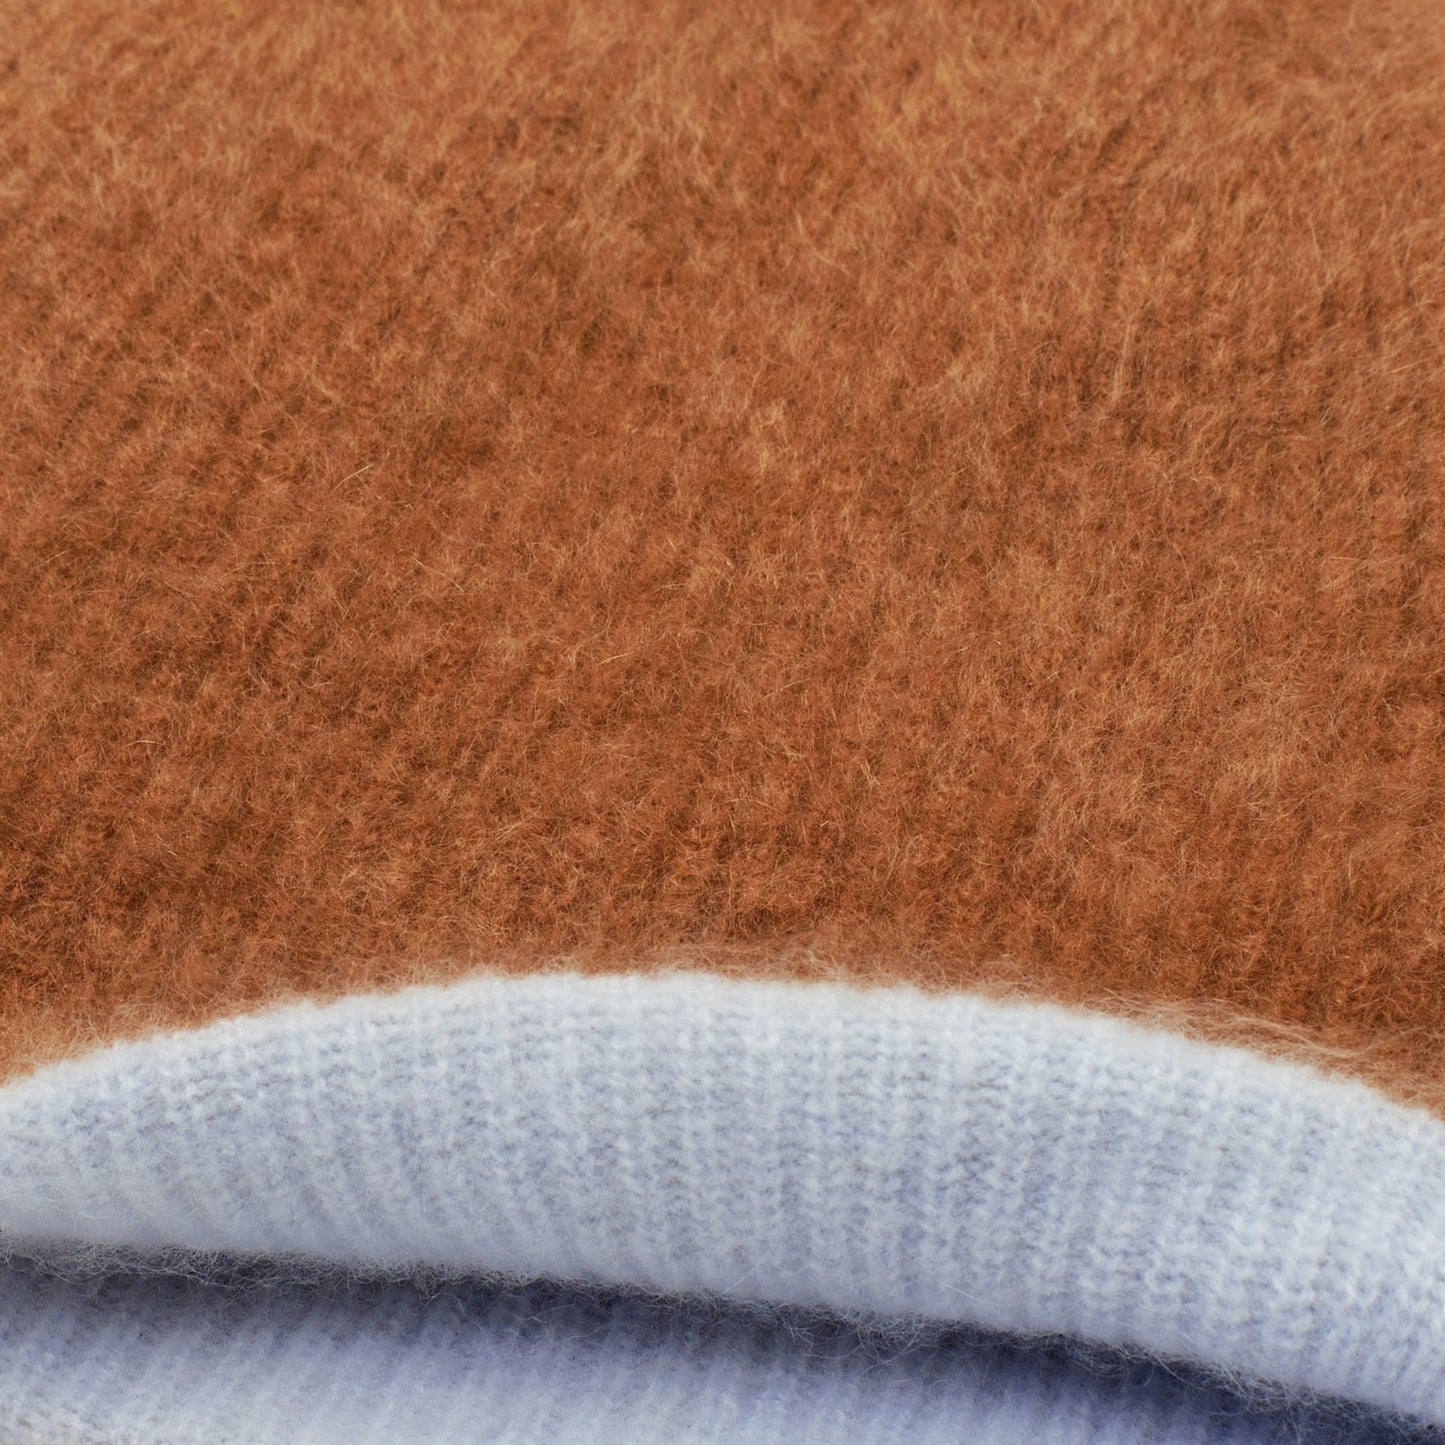 The Grizzly Reversible Beanie - Almond/Sky